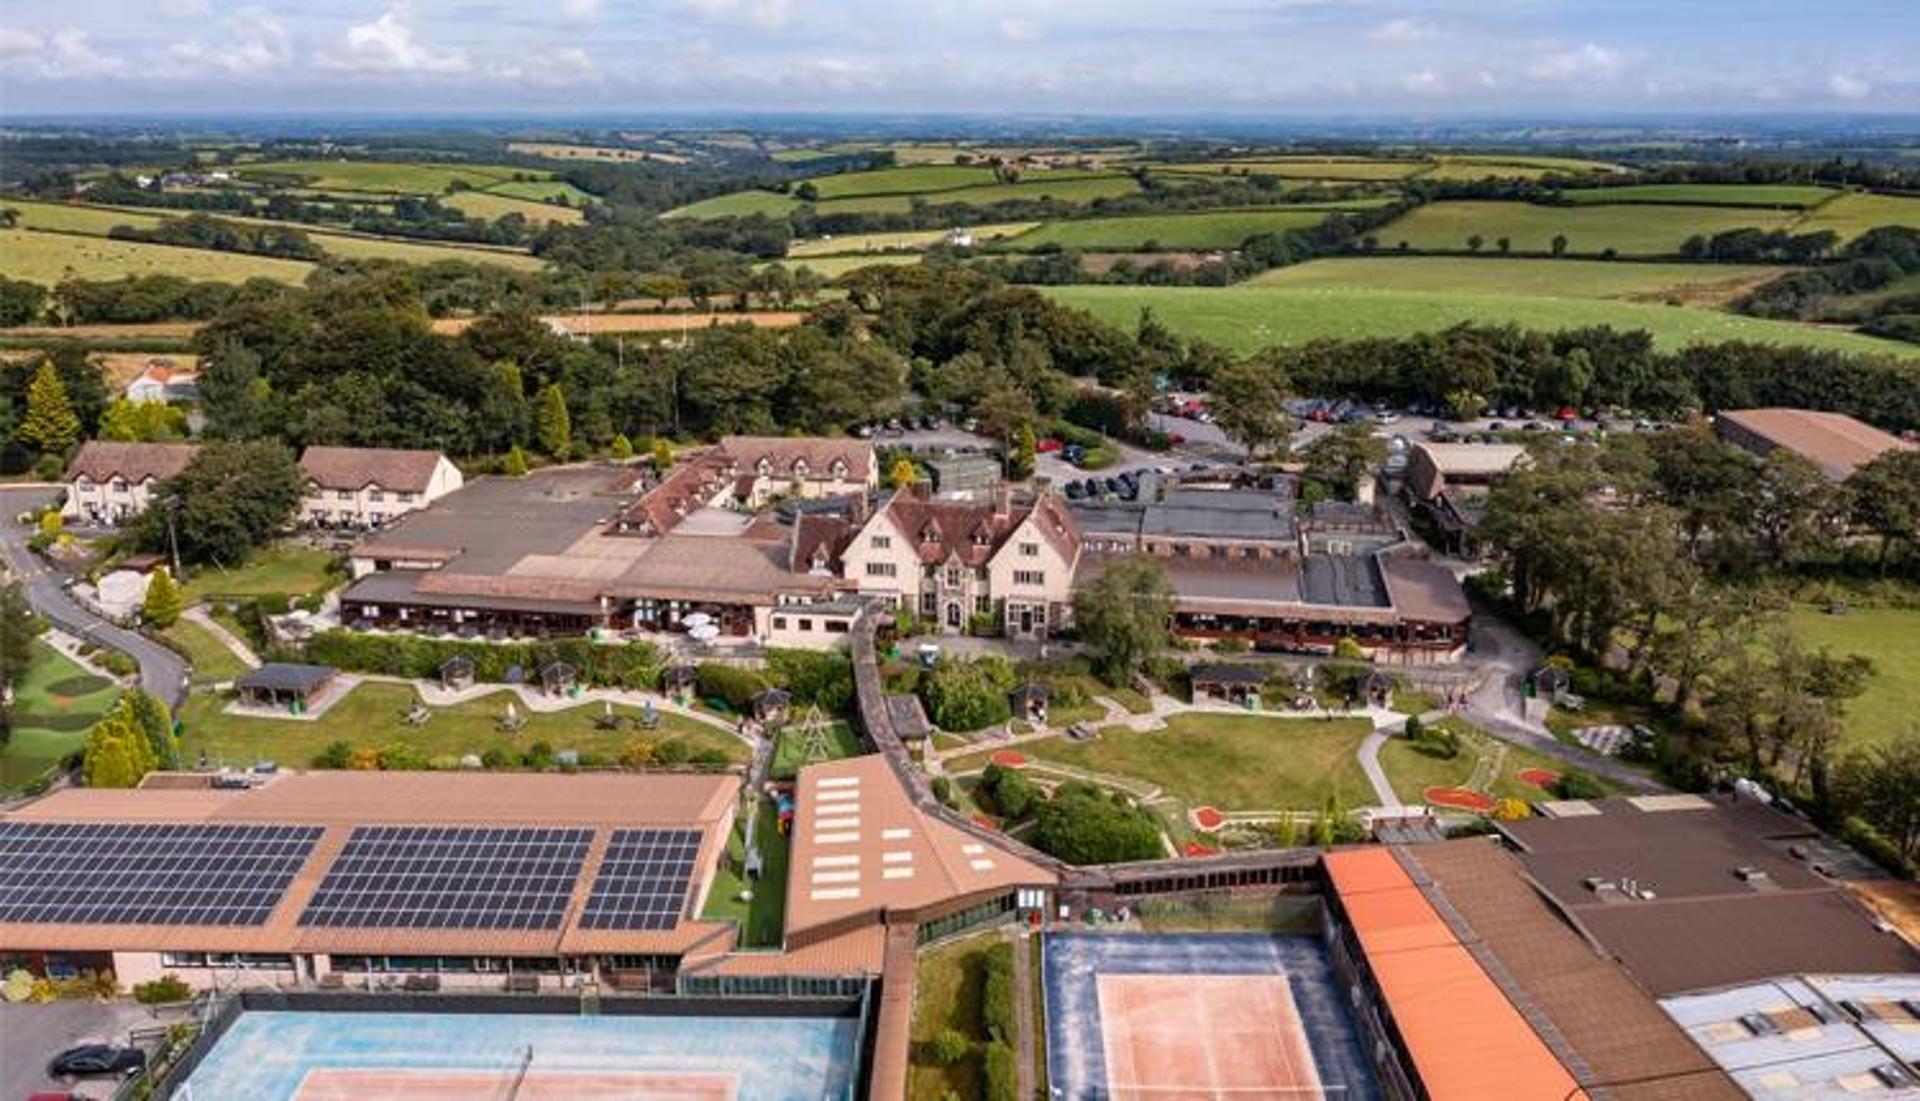 Two Devon hotels up for sale for £23m 